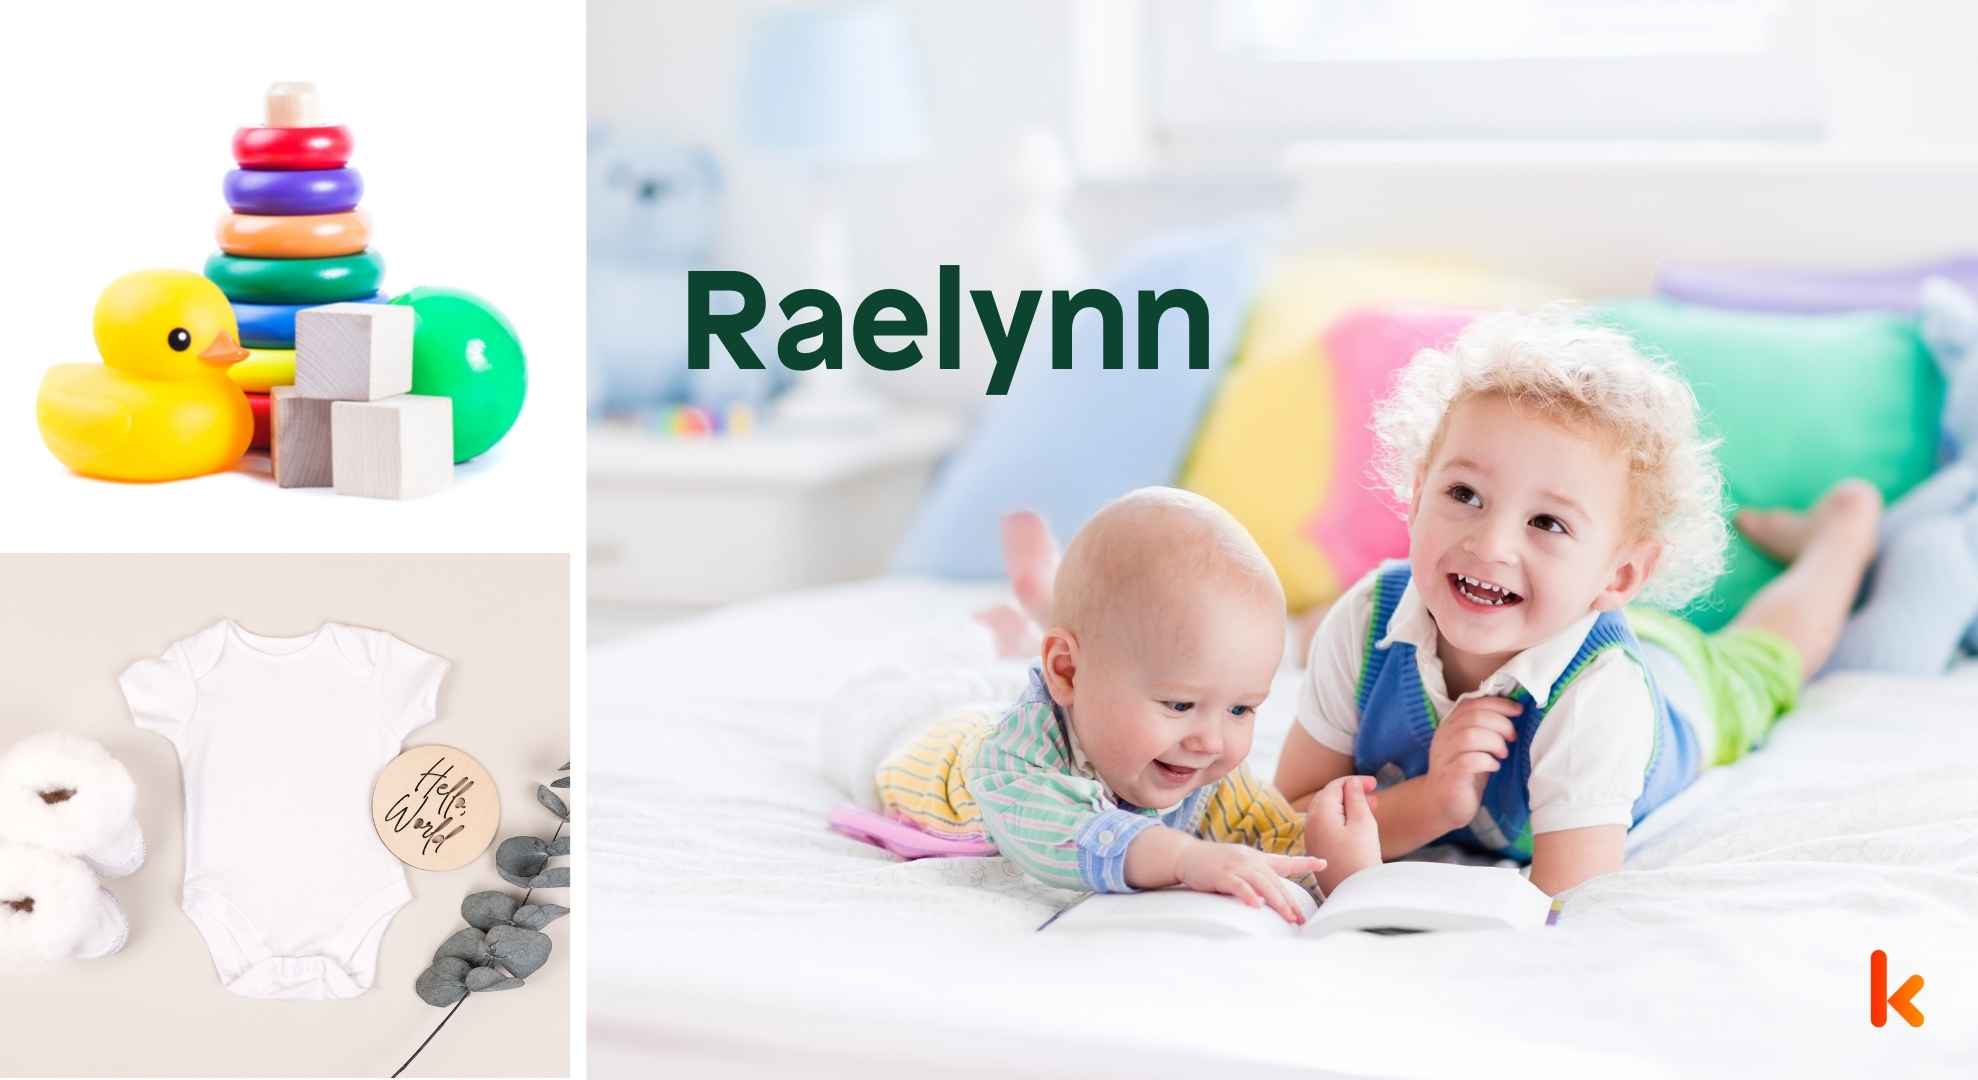 Meaning of the name Raelynn